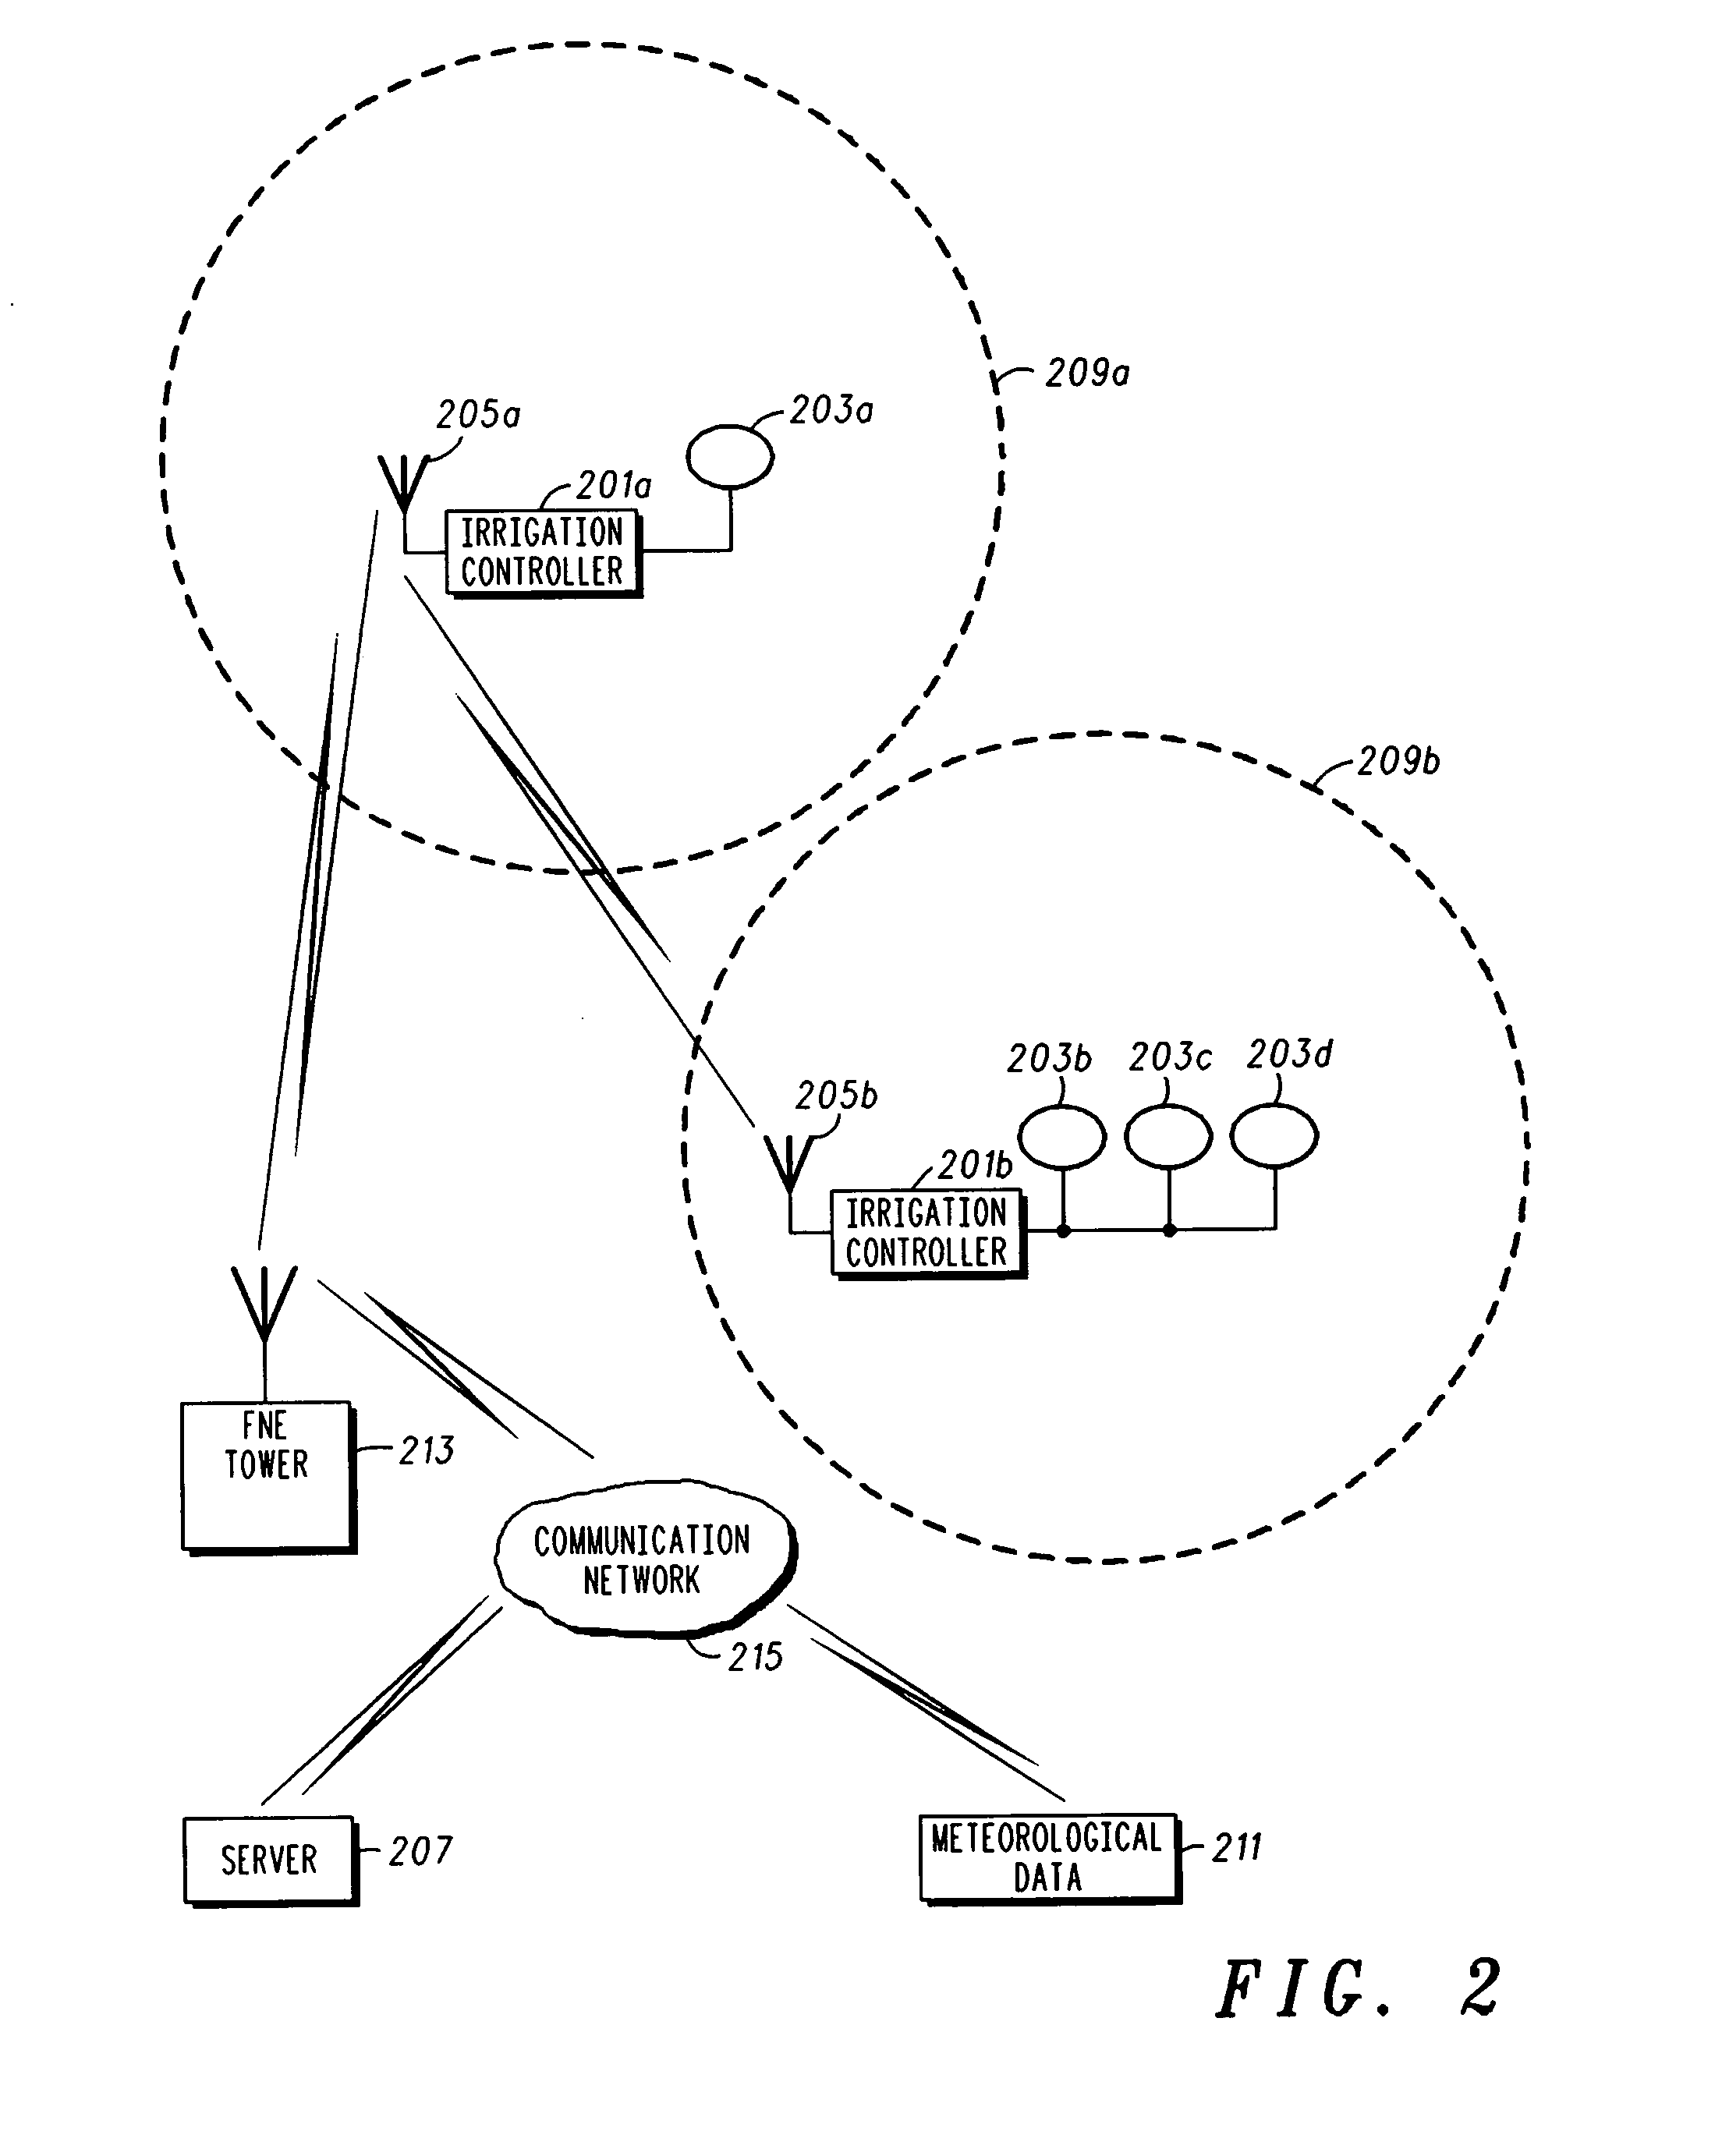 Method and system for transmitting and utilizing forecast meteorological data for irrigation controllers